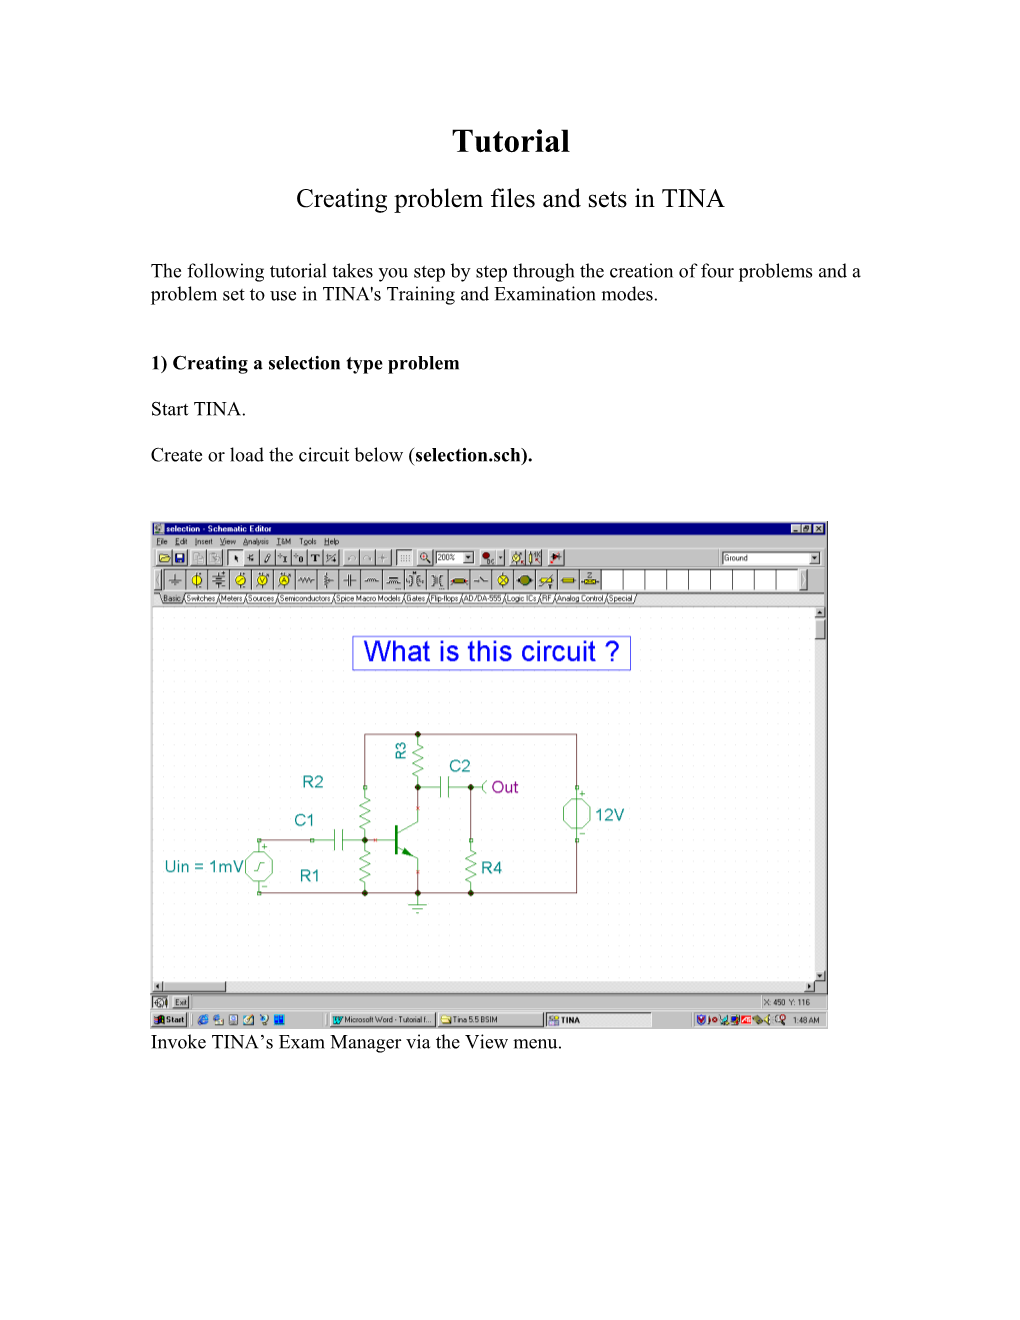 Creating Problem Files and Sets in TINA